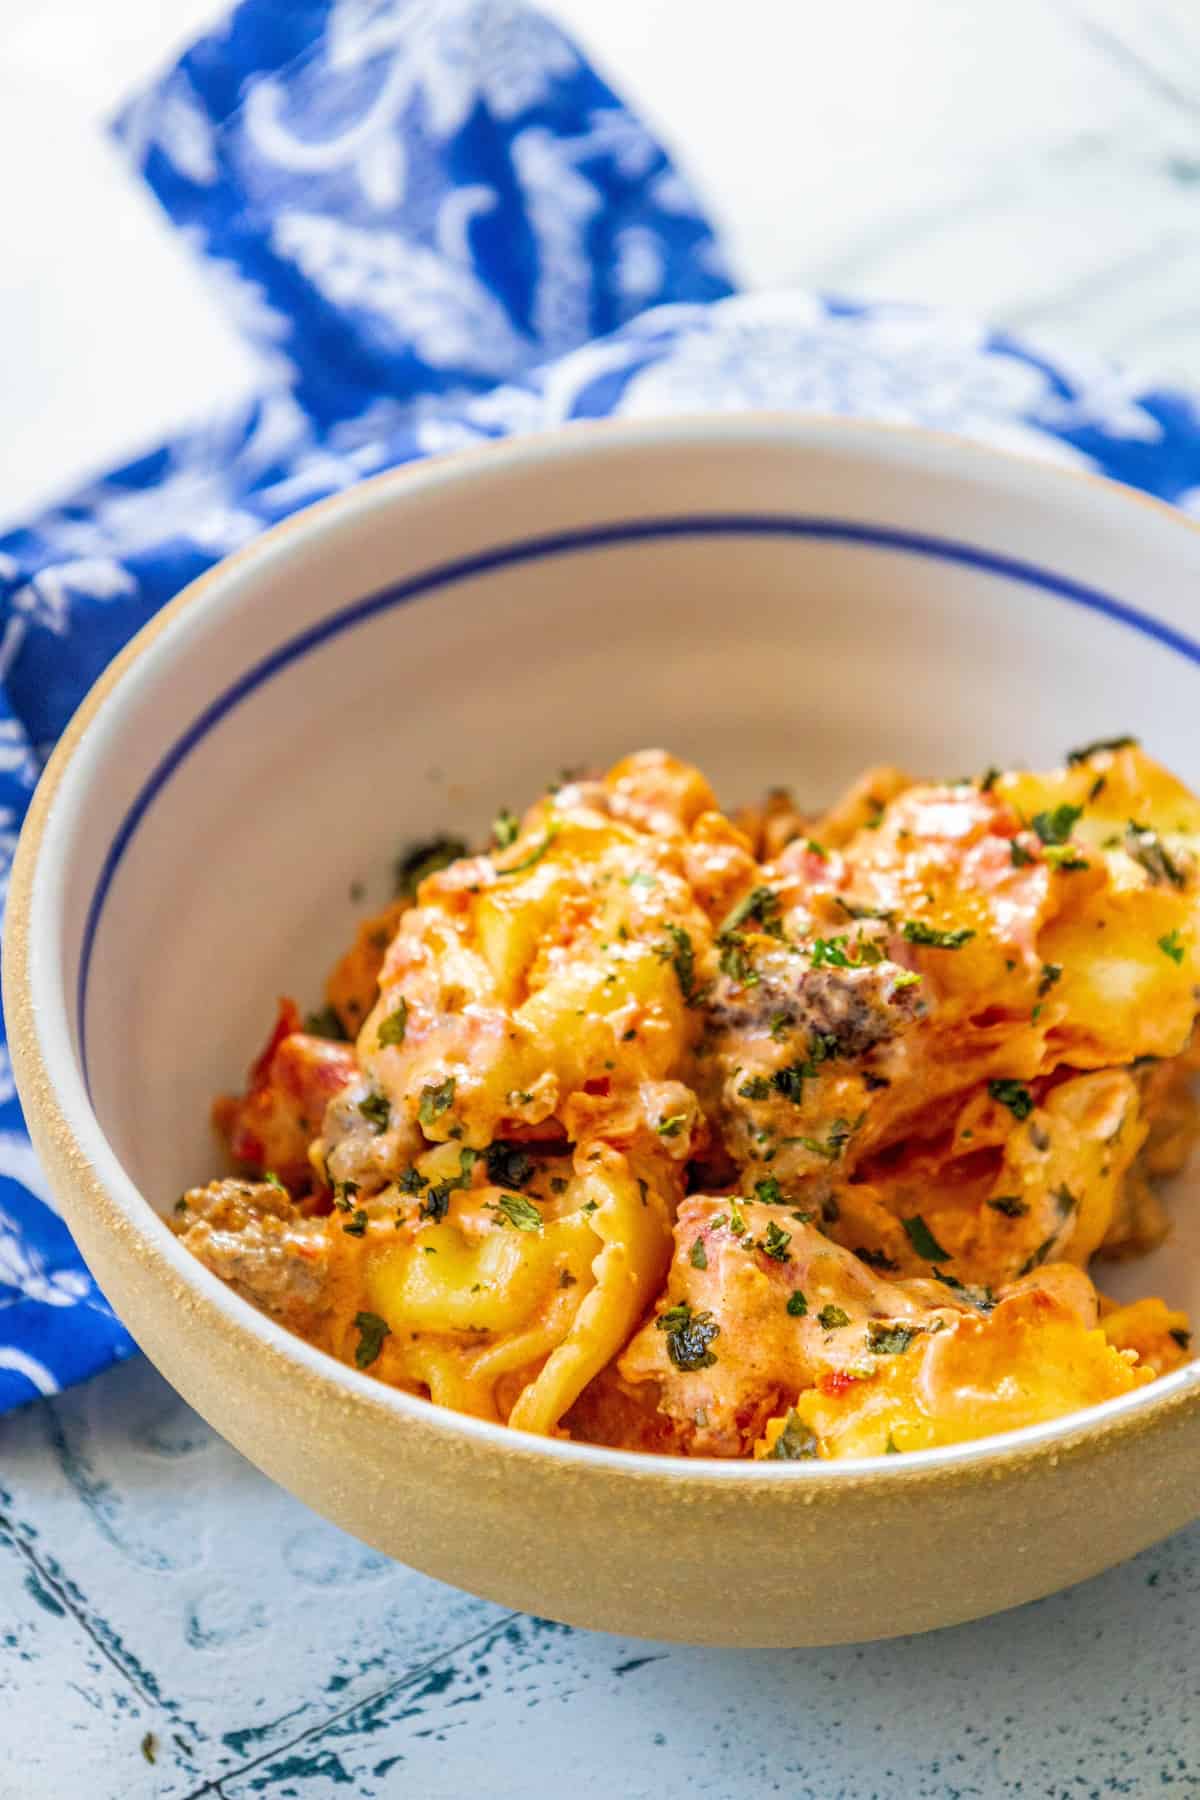 A cheesy bowl of baked tortellini with sauce.